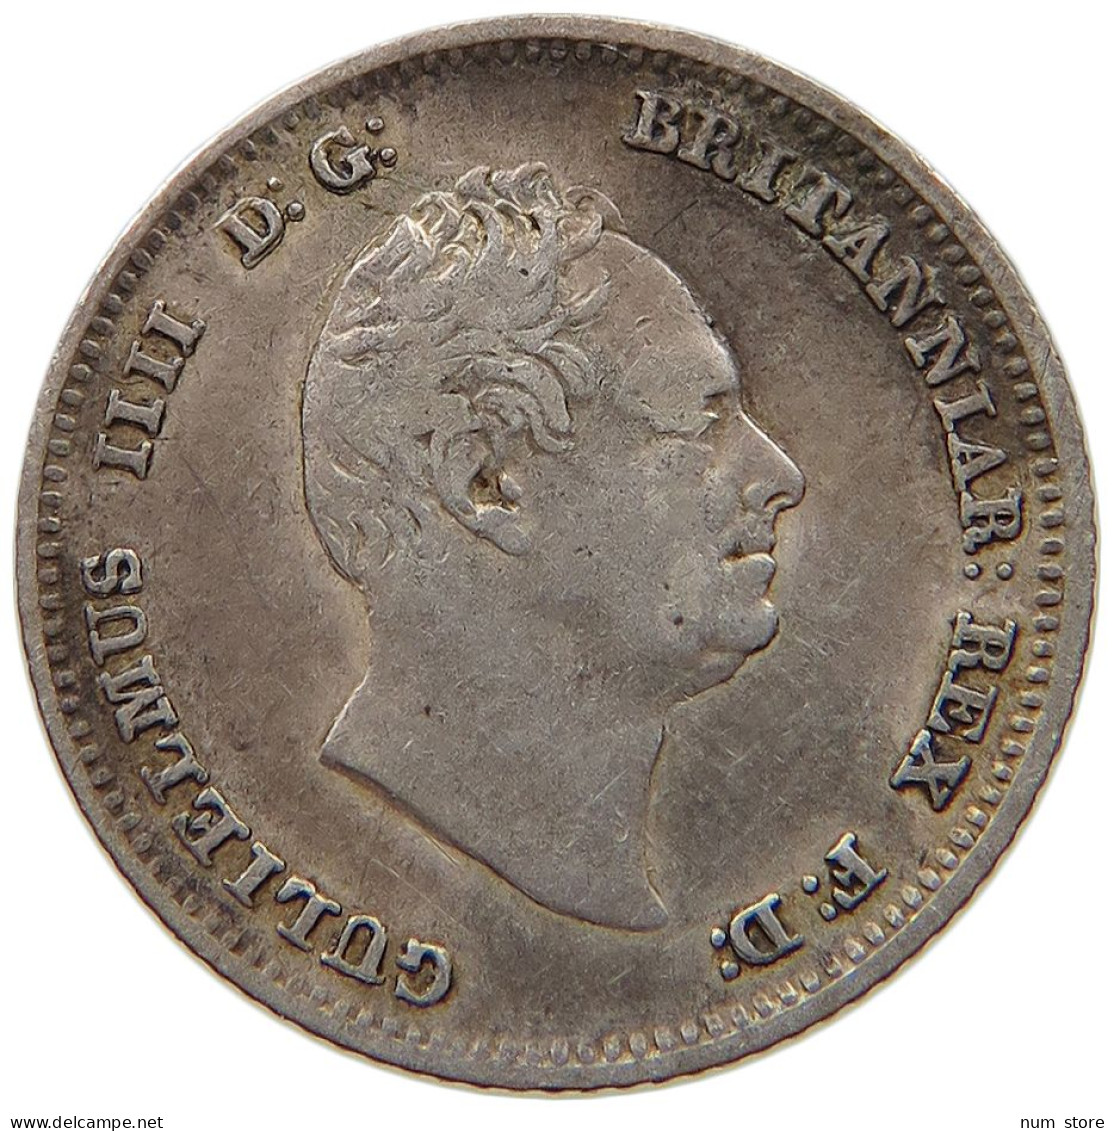 GREAT BRITAIN FOURPENCE 1836 WILLIAM IV. (1830-1837) #t082 0049 - G. 4 Pence/ Groat